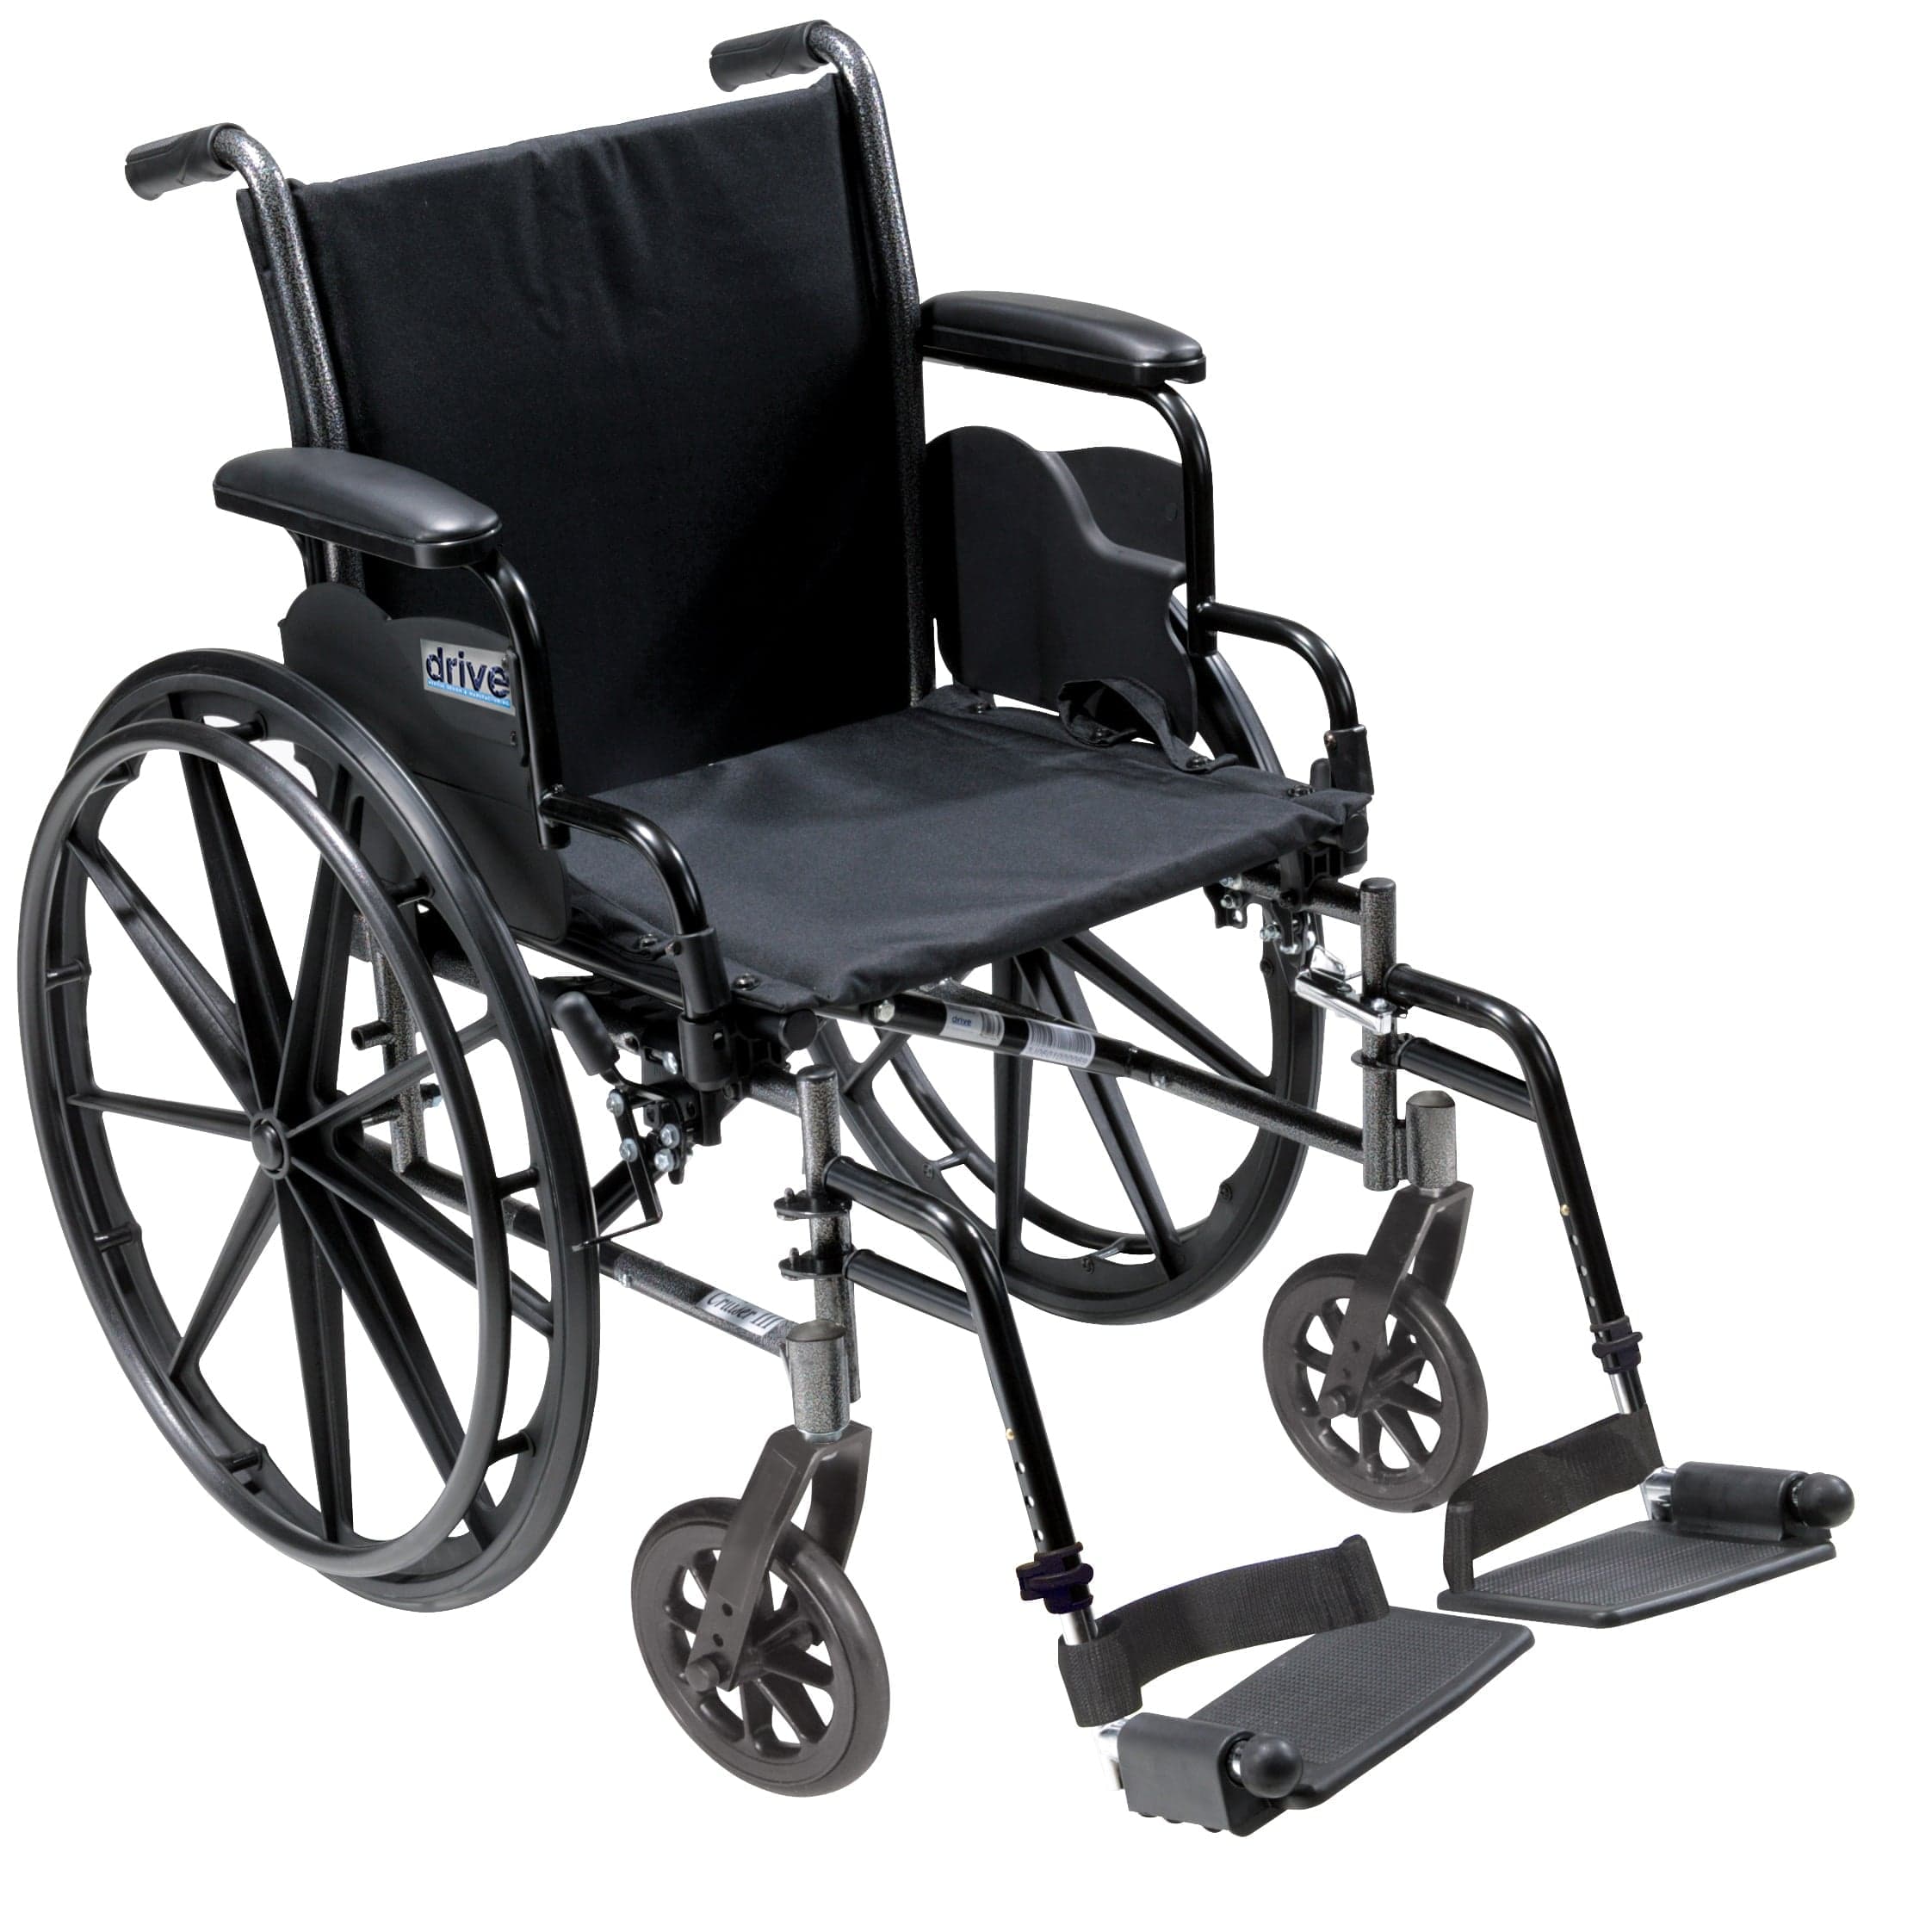 Drive Medical Wheelchairs Flip Back Removable Desk Arms and Swing away Footrests / 18" Seat Drive Medical Cruiser III Light Weight Wheelchair with Flip Back Removable Arms